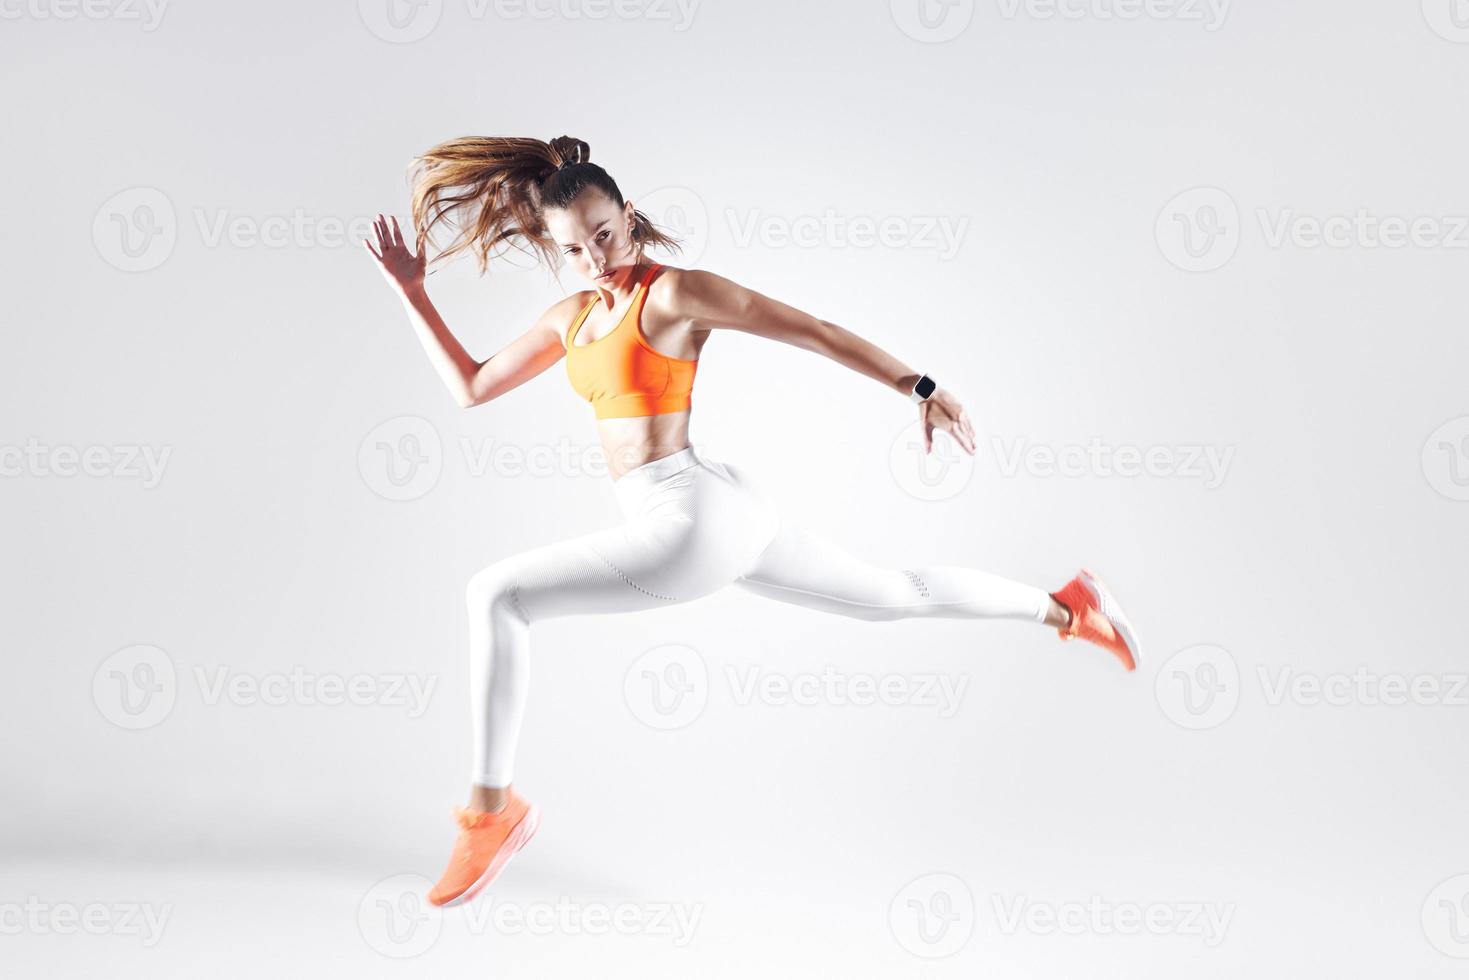 Beautiful young woman in sports clothing running against white background photo